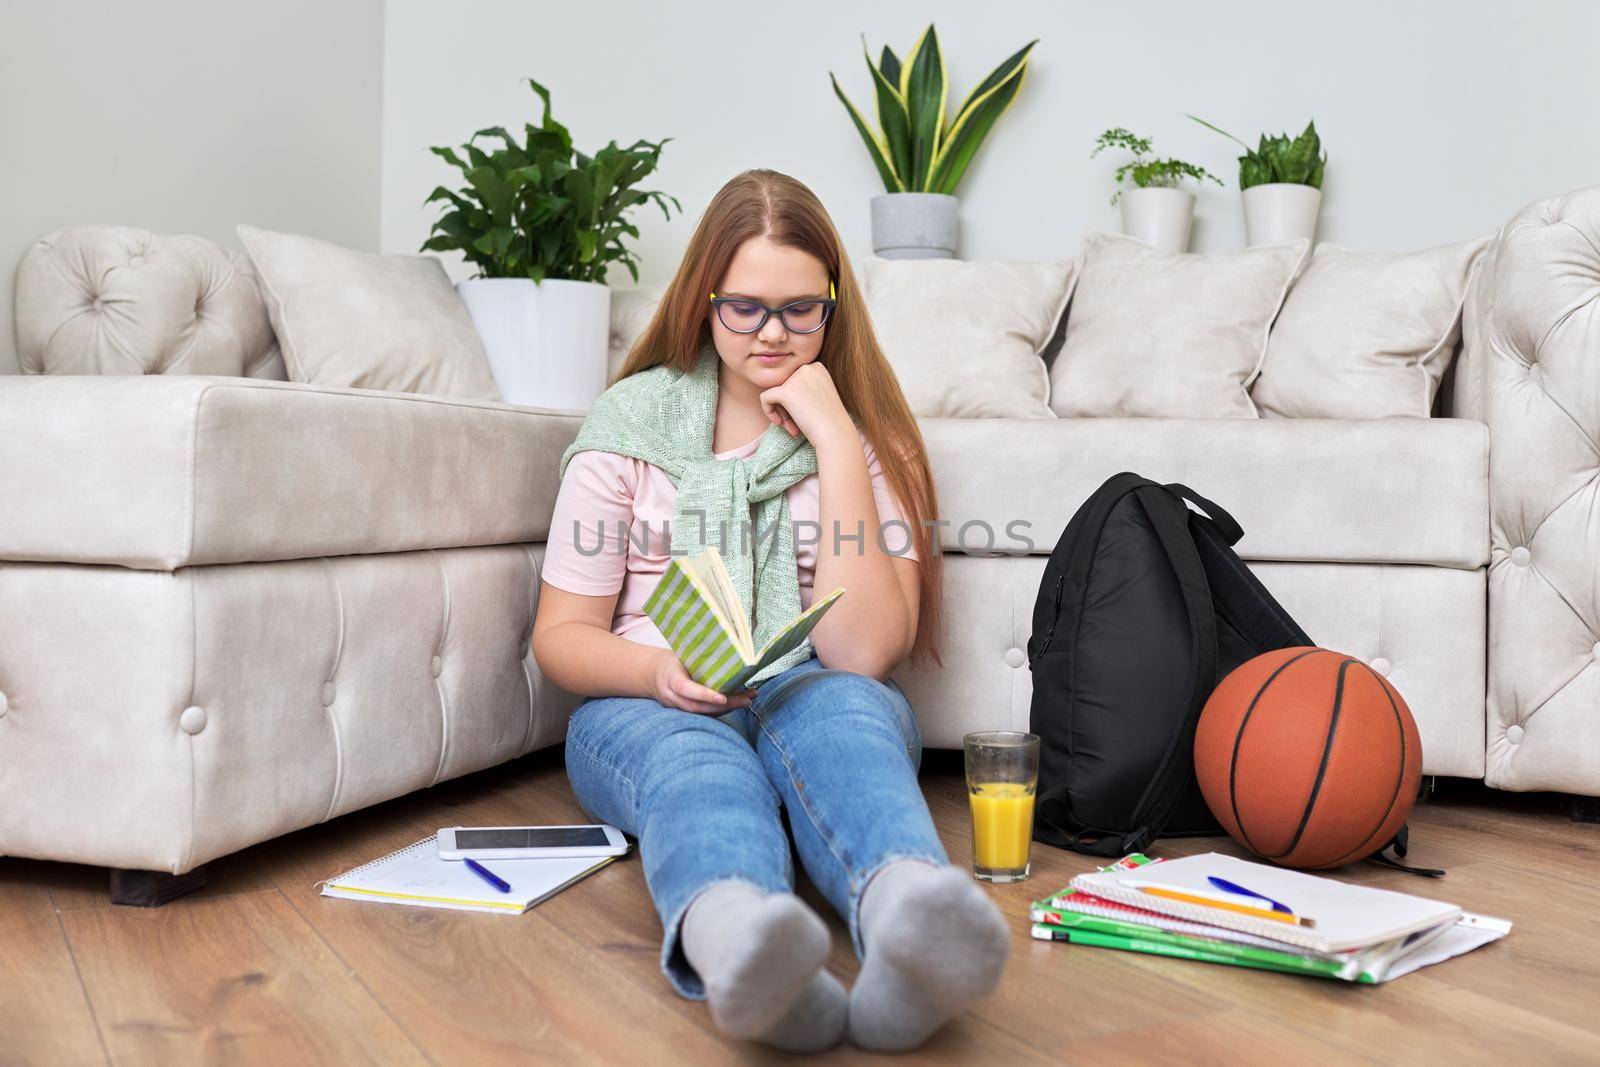 Lifestyle, education children 12, 13 years old concept. Teenage girl sitting at home on the living room floor reading book with backpack, books, school notebooks, basketball